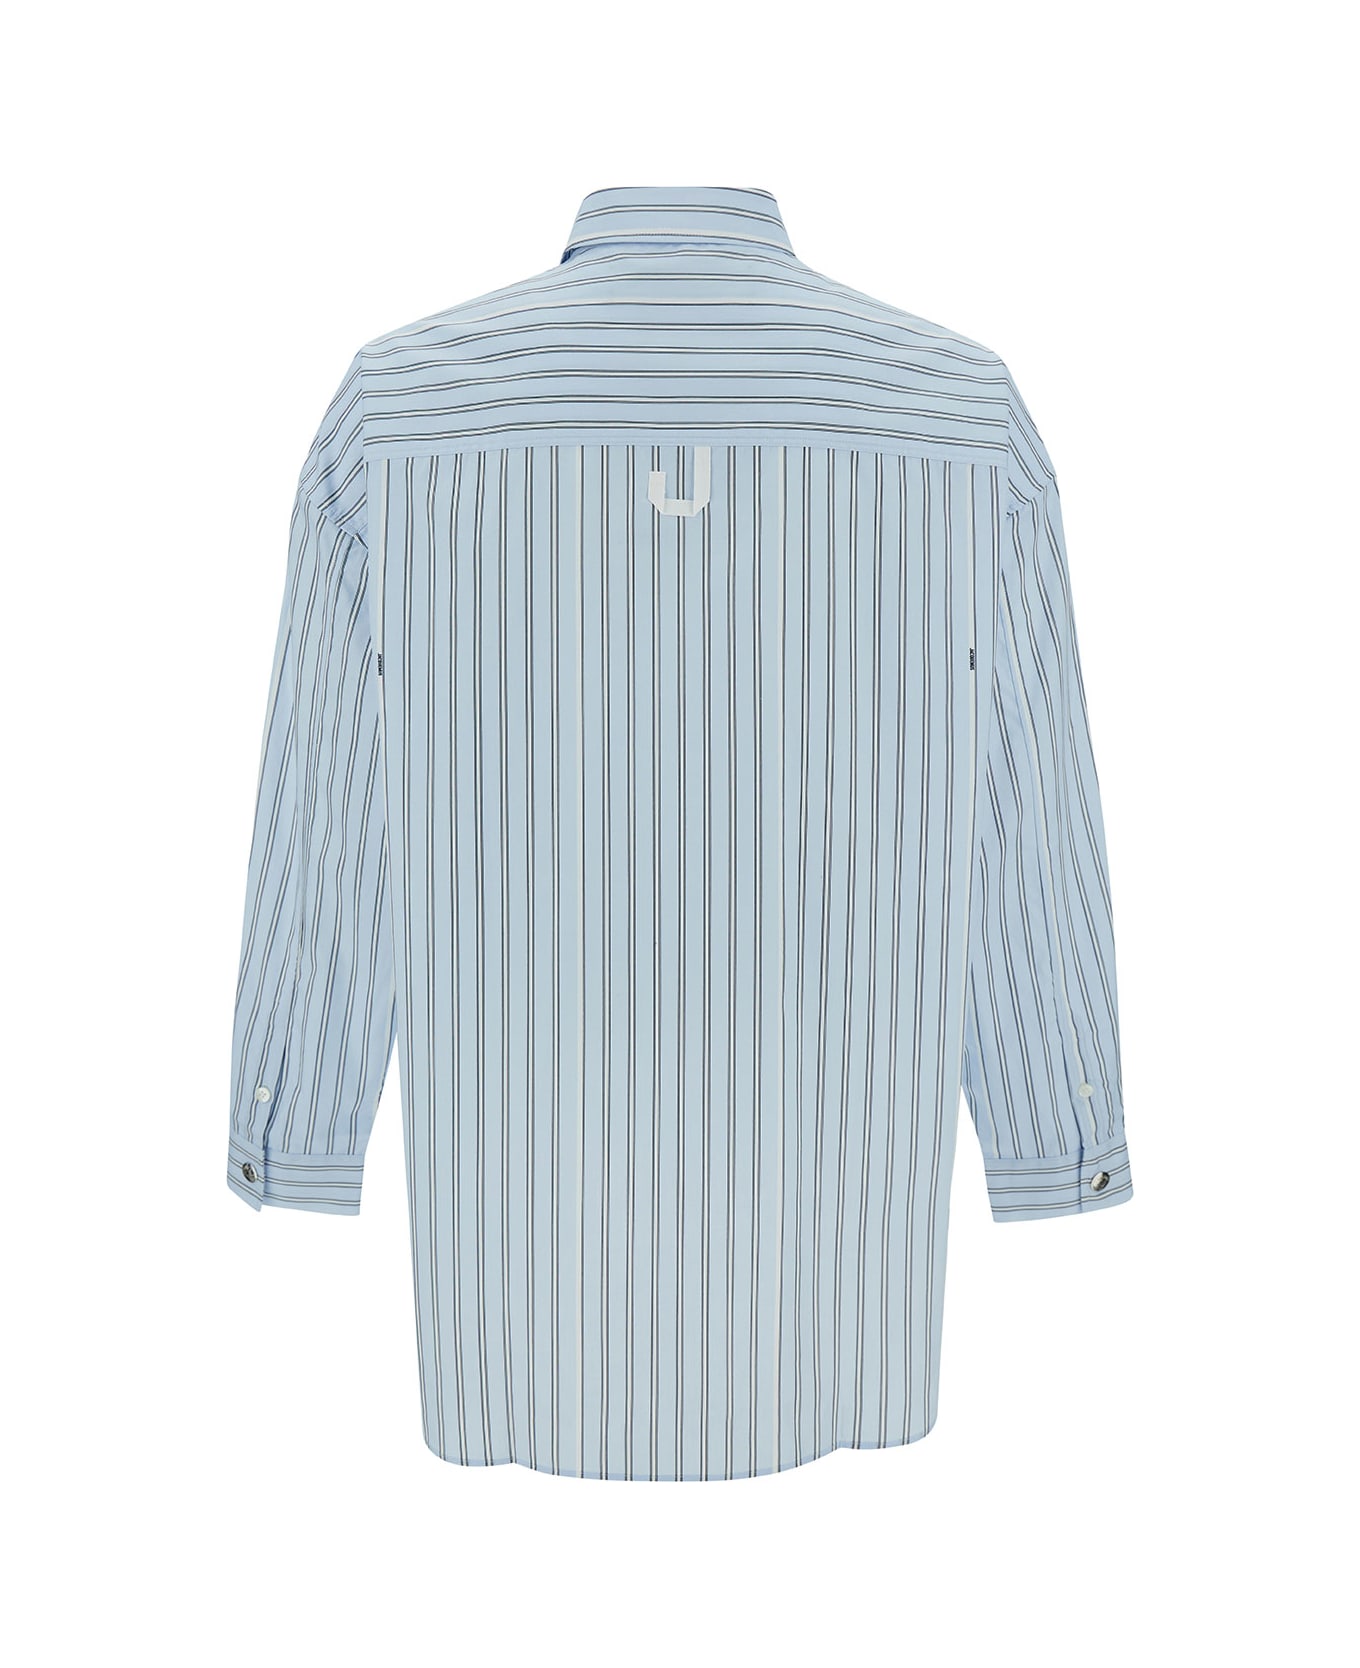 Jacquemus Light Blue Striped Shirt With Logo Lettering Detail In Cotton Man - Print blue stripe シャツ